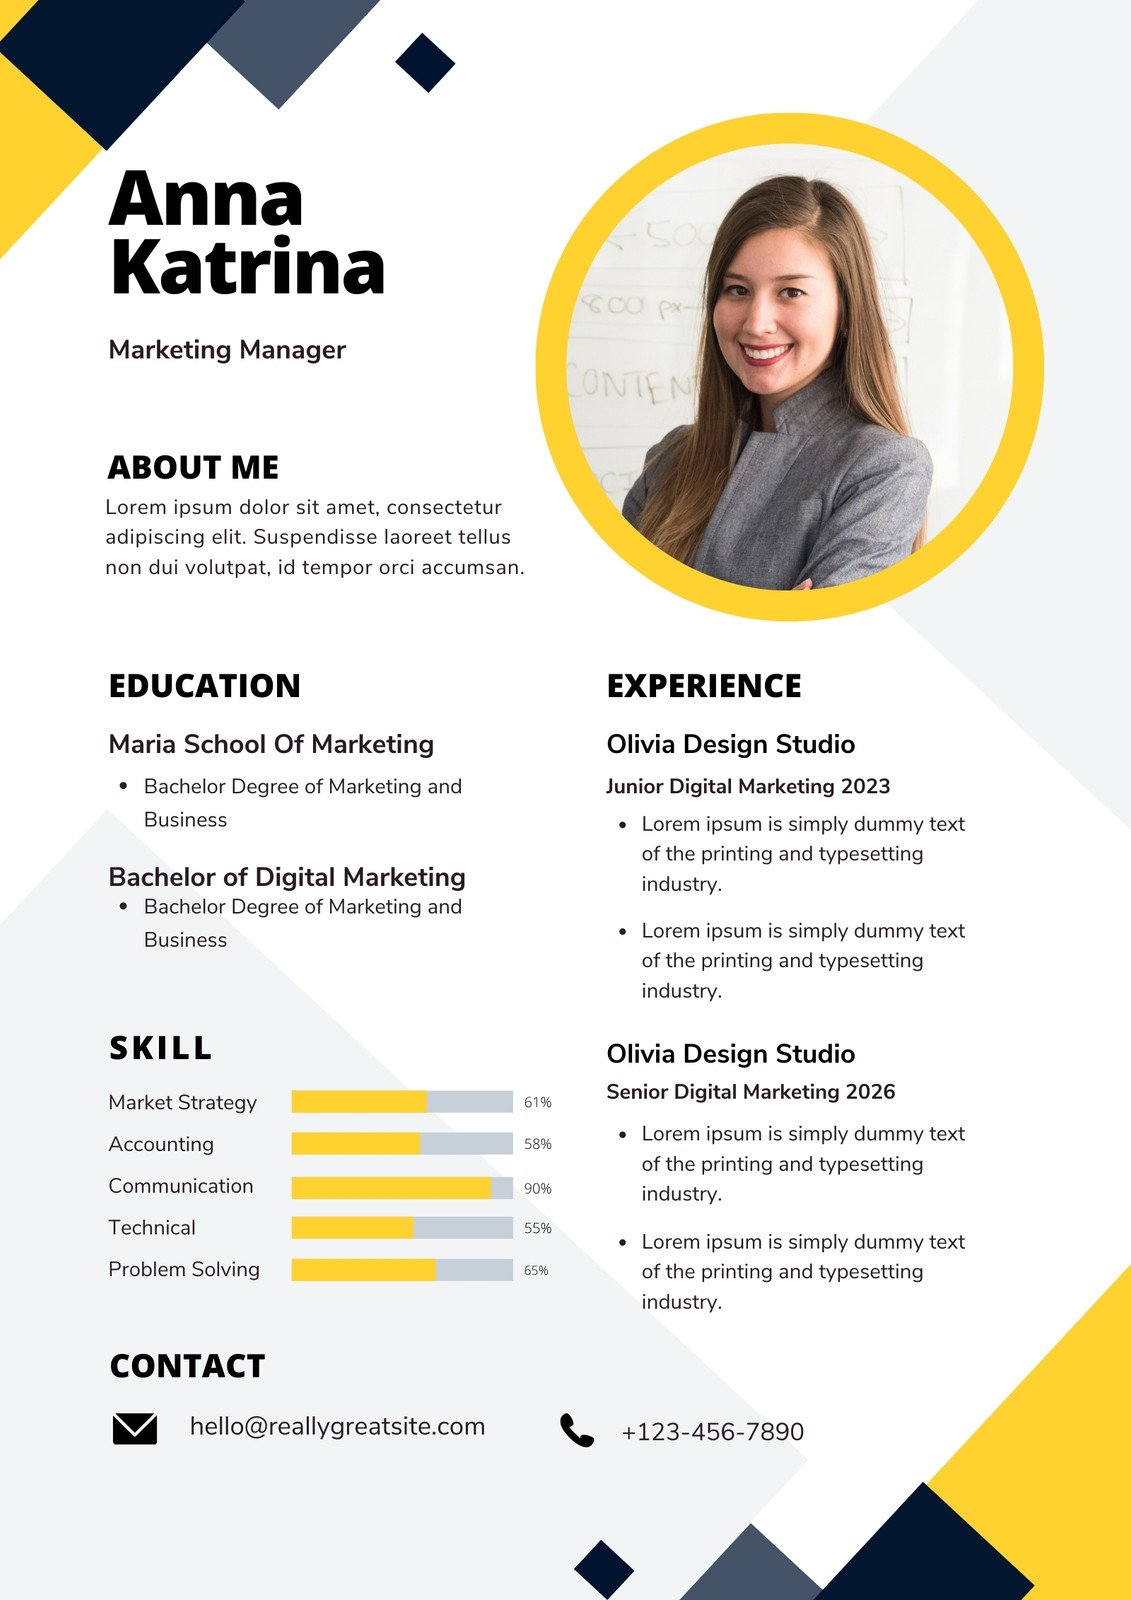 Should You Use Canva for Resumes?